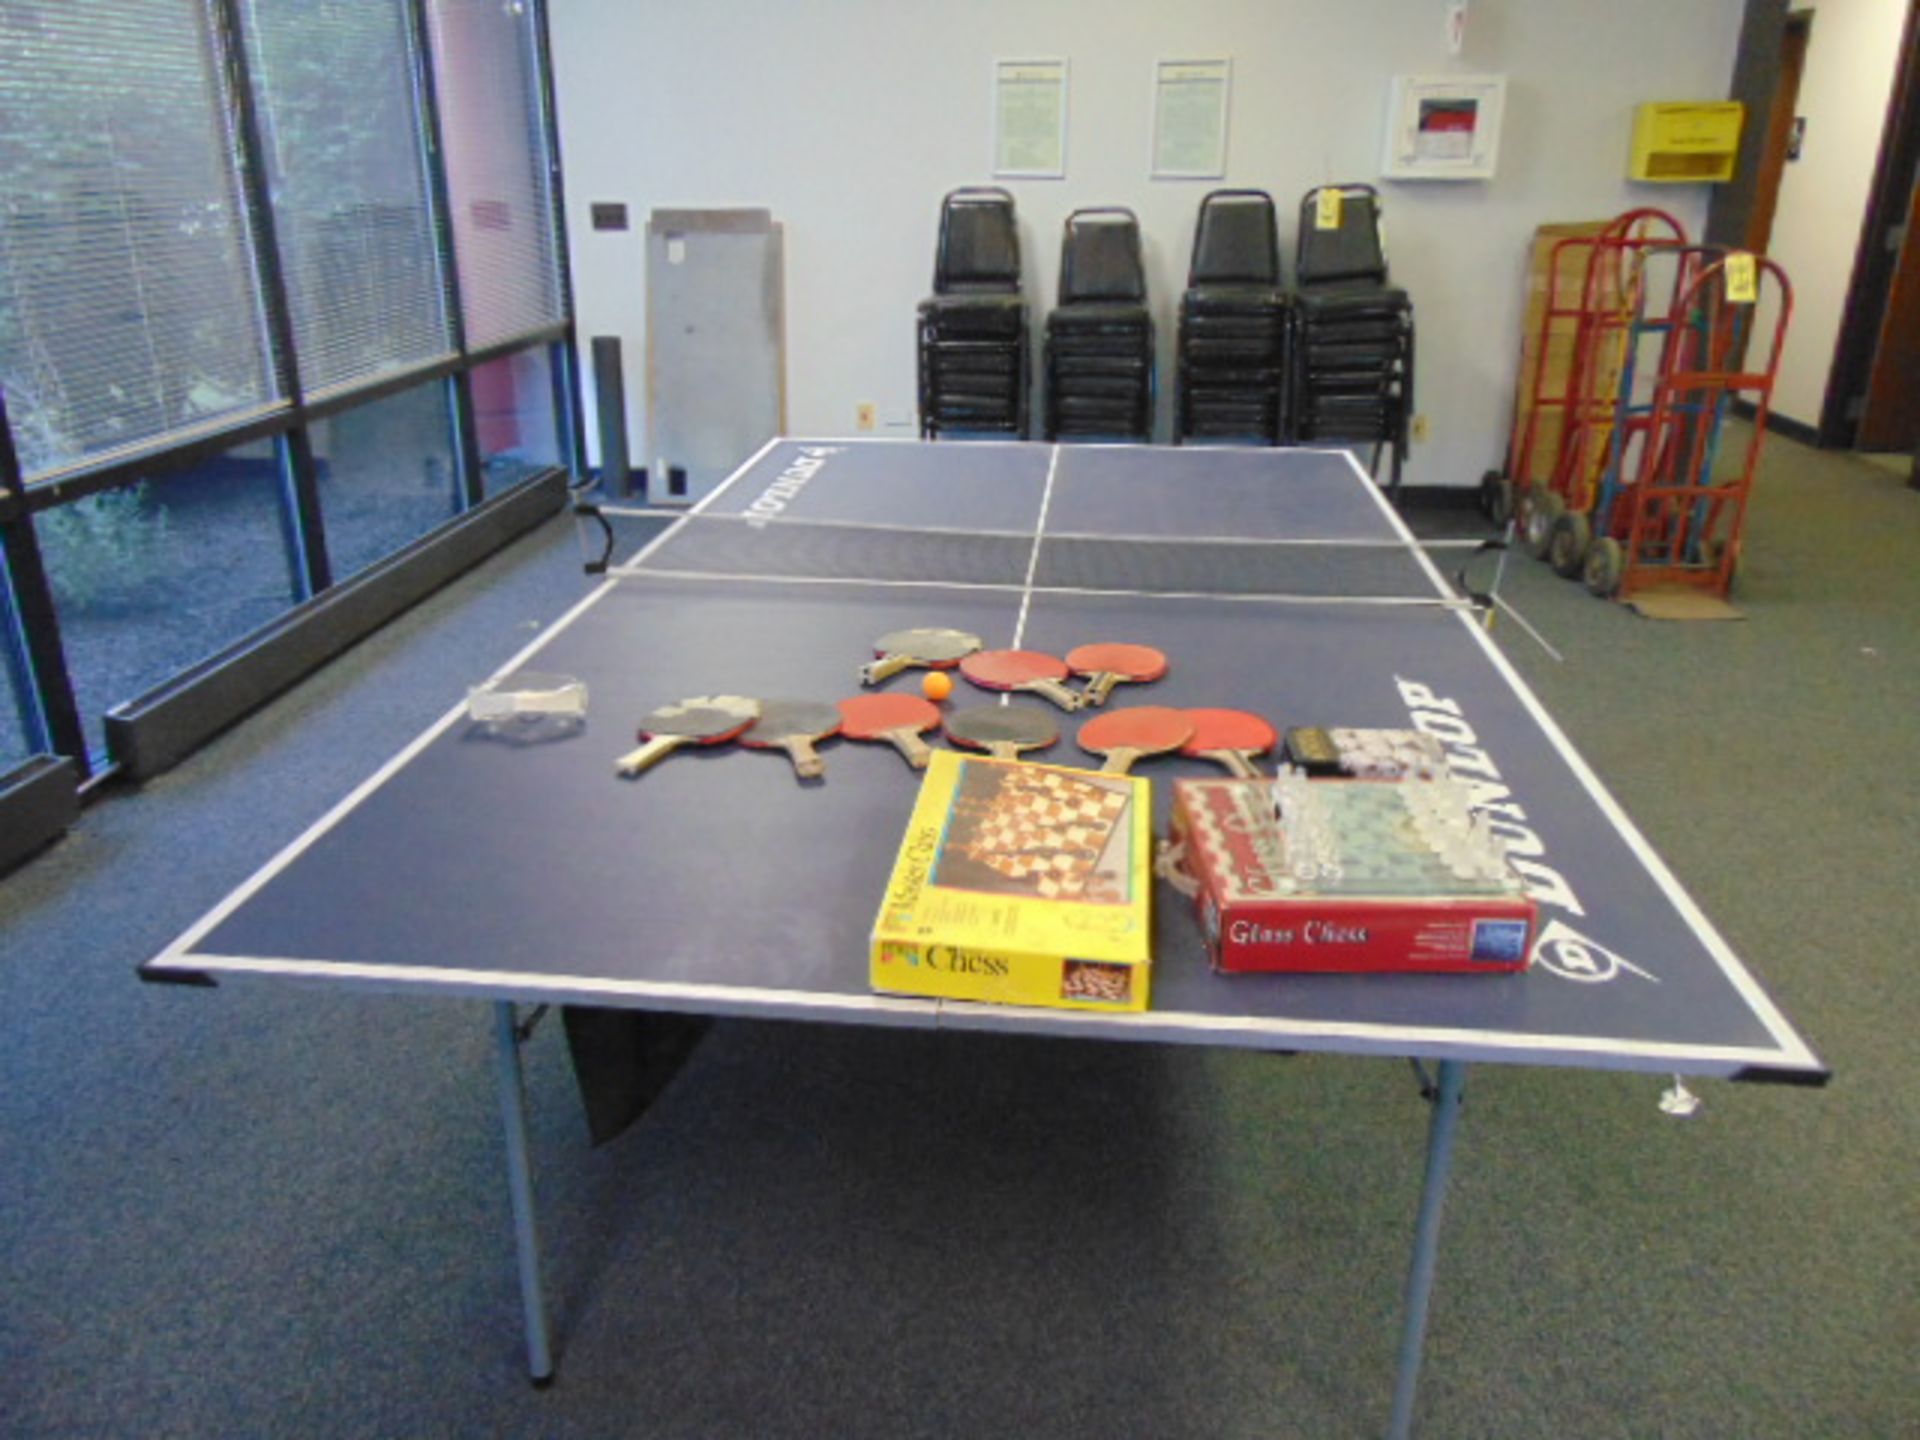 LOT CONSISTING OF: Dunlap ping pong table & assorted games - Image 2 of 3